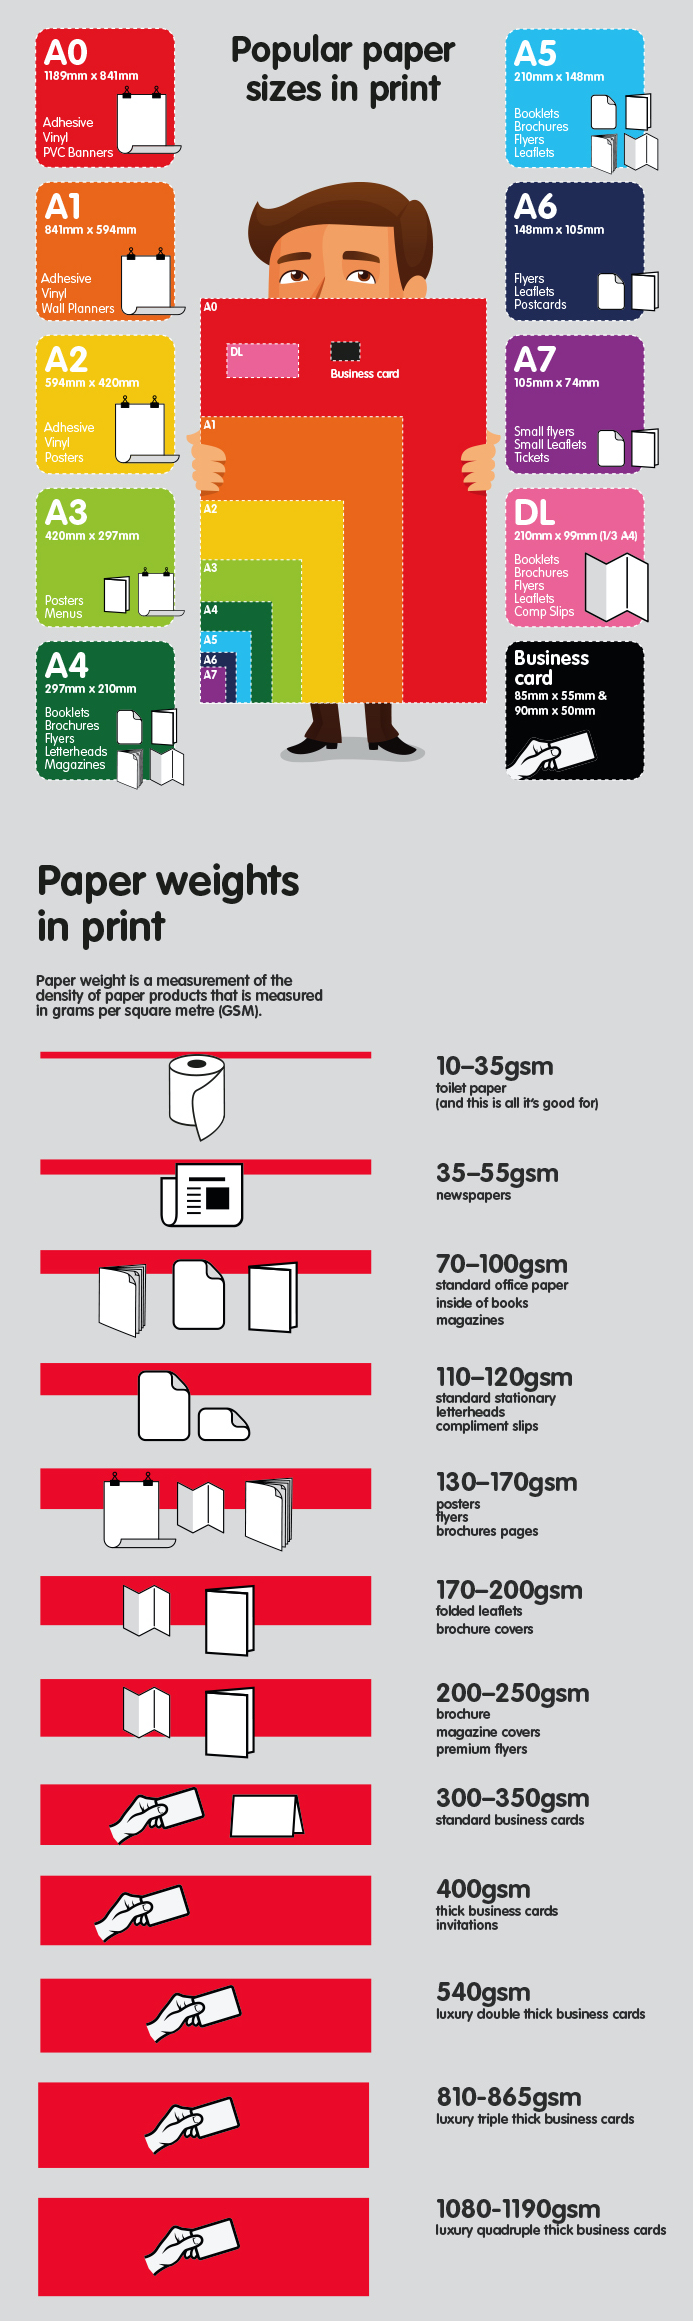 Choosing Types of Paper for Printing: Paper Weight Guide